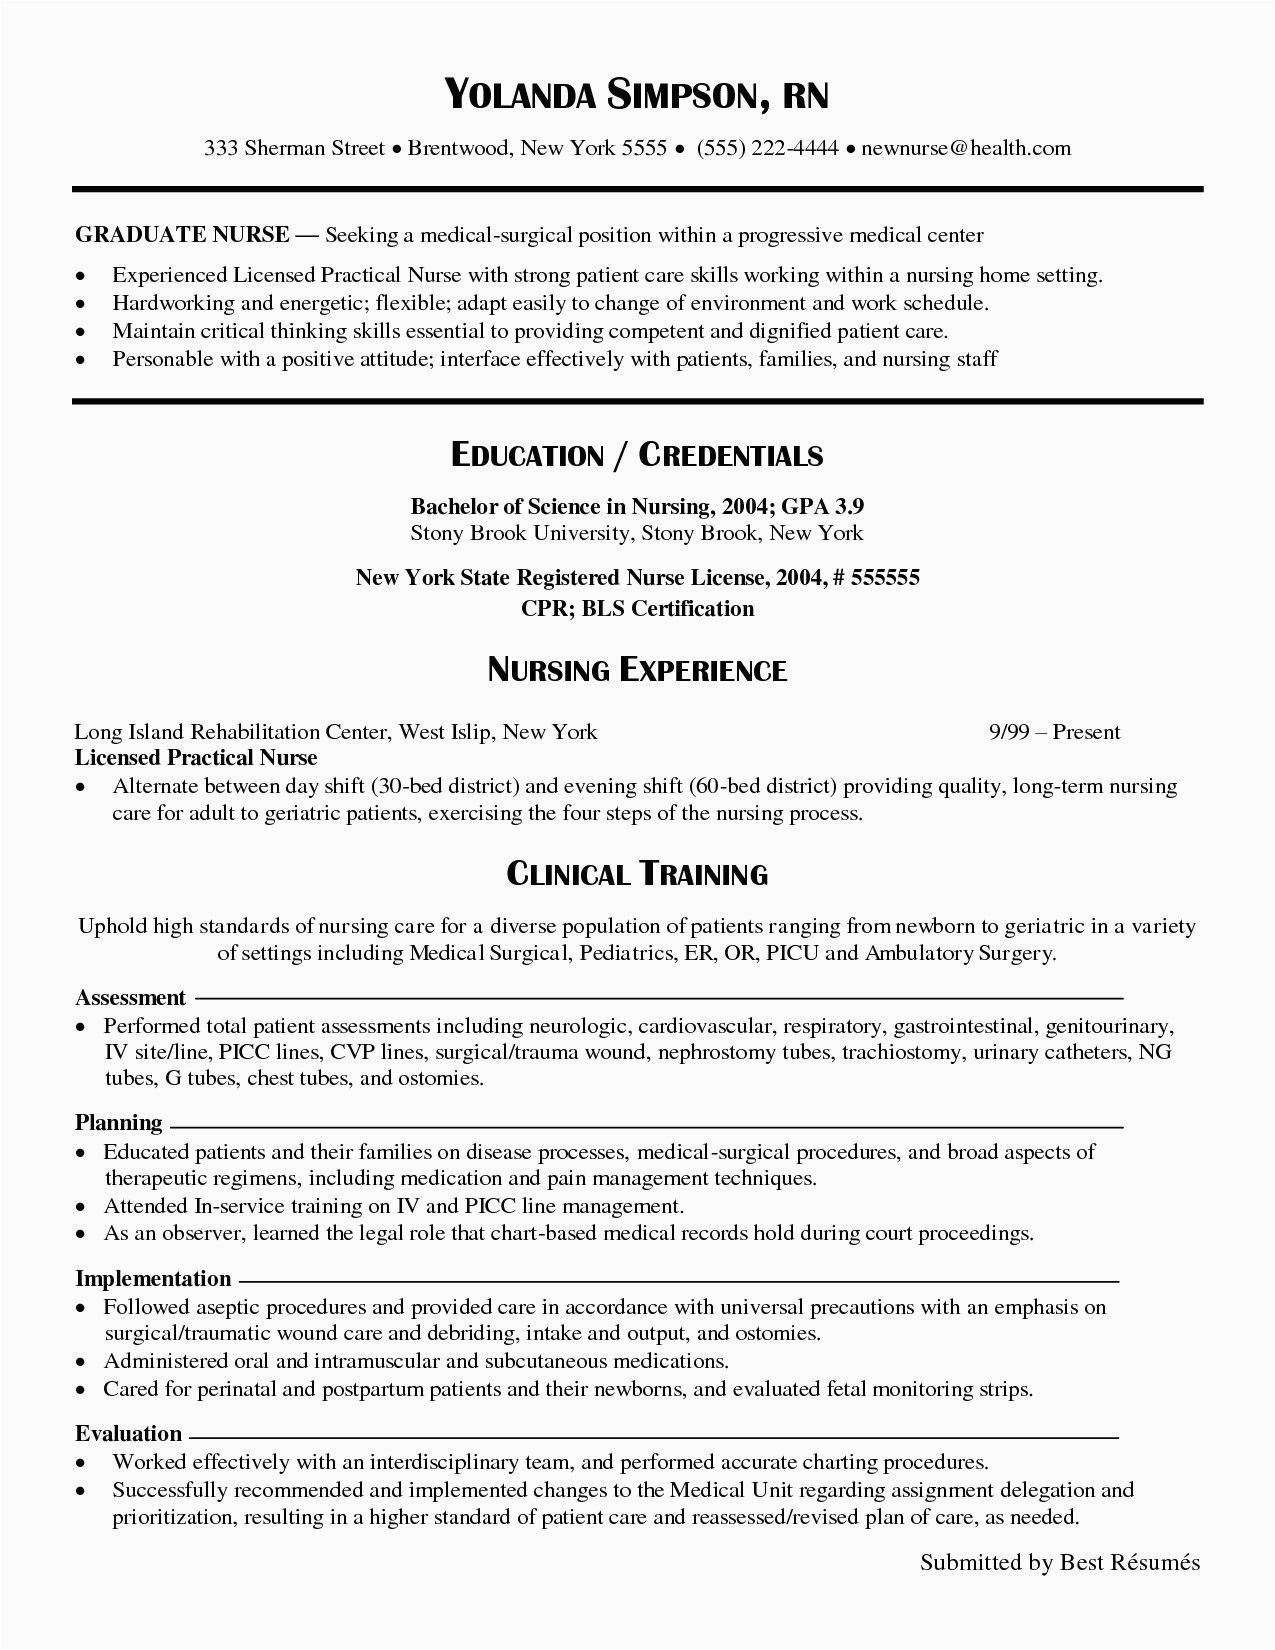 Sample Resume for Newly Graduated Student Sample Cv Newly Graduate Nurse – How to Write Graduate